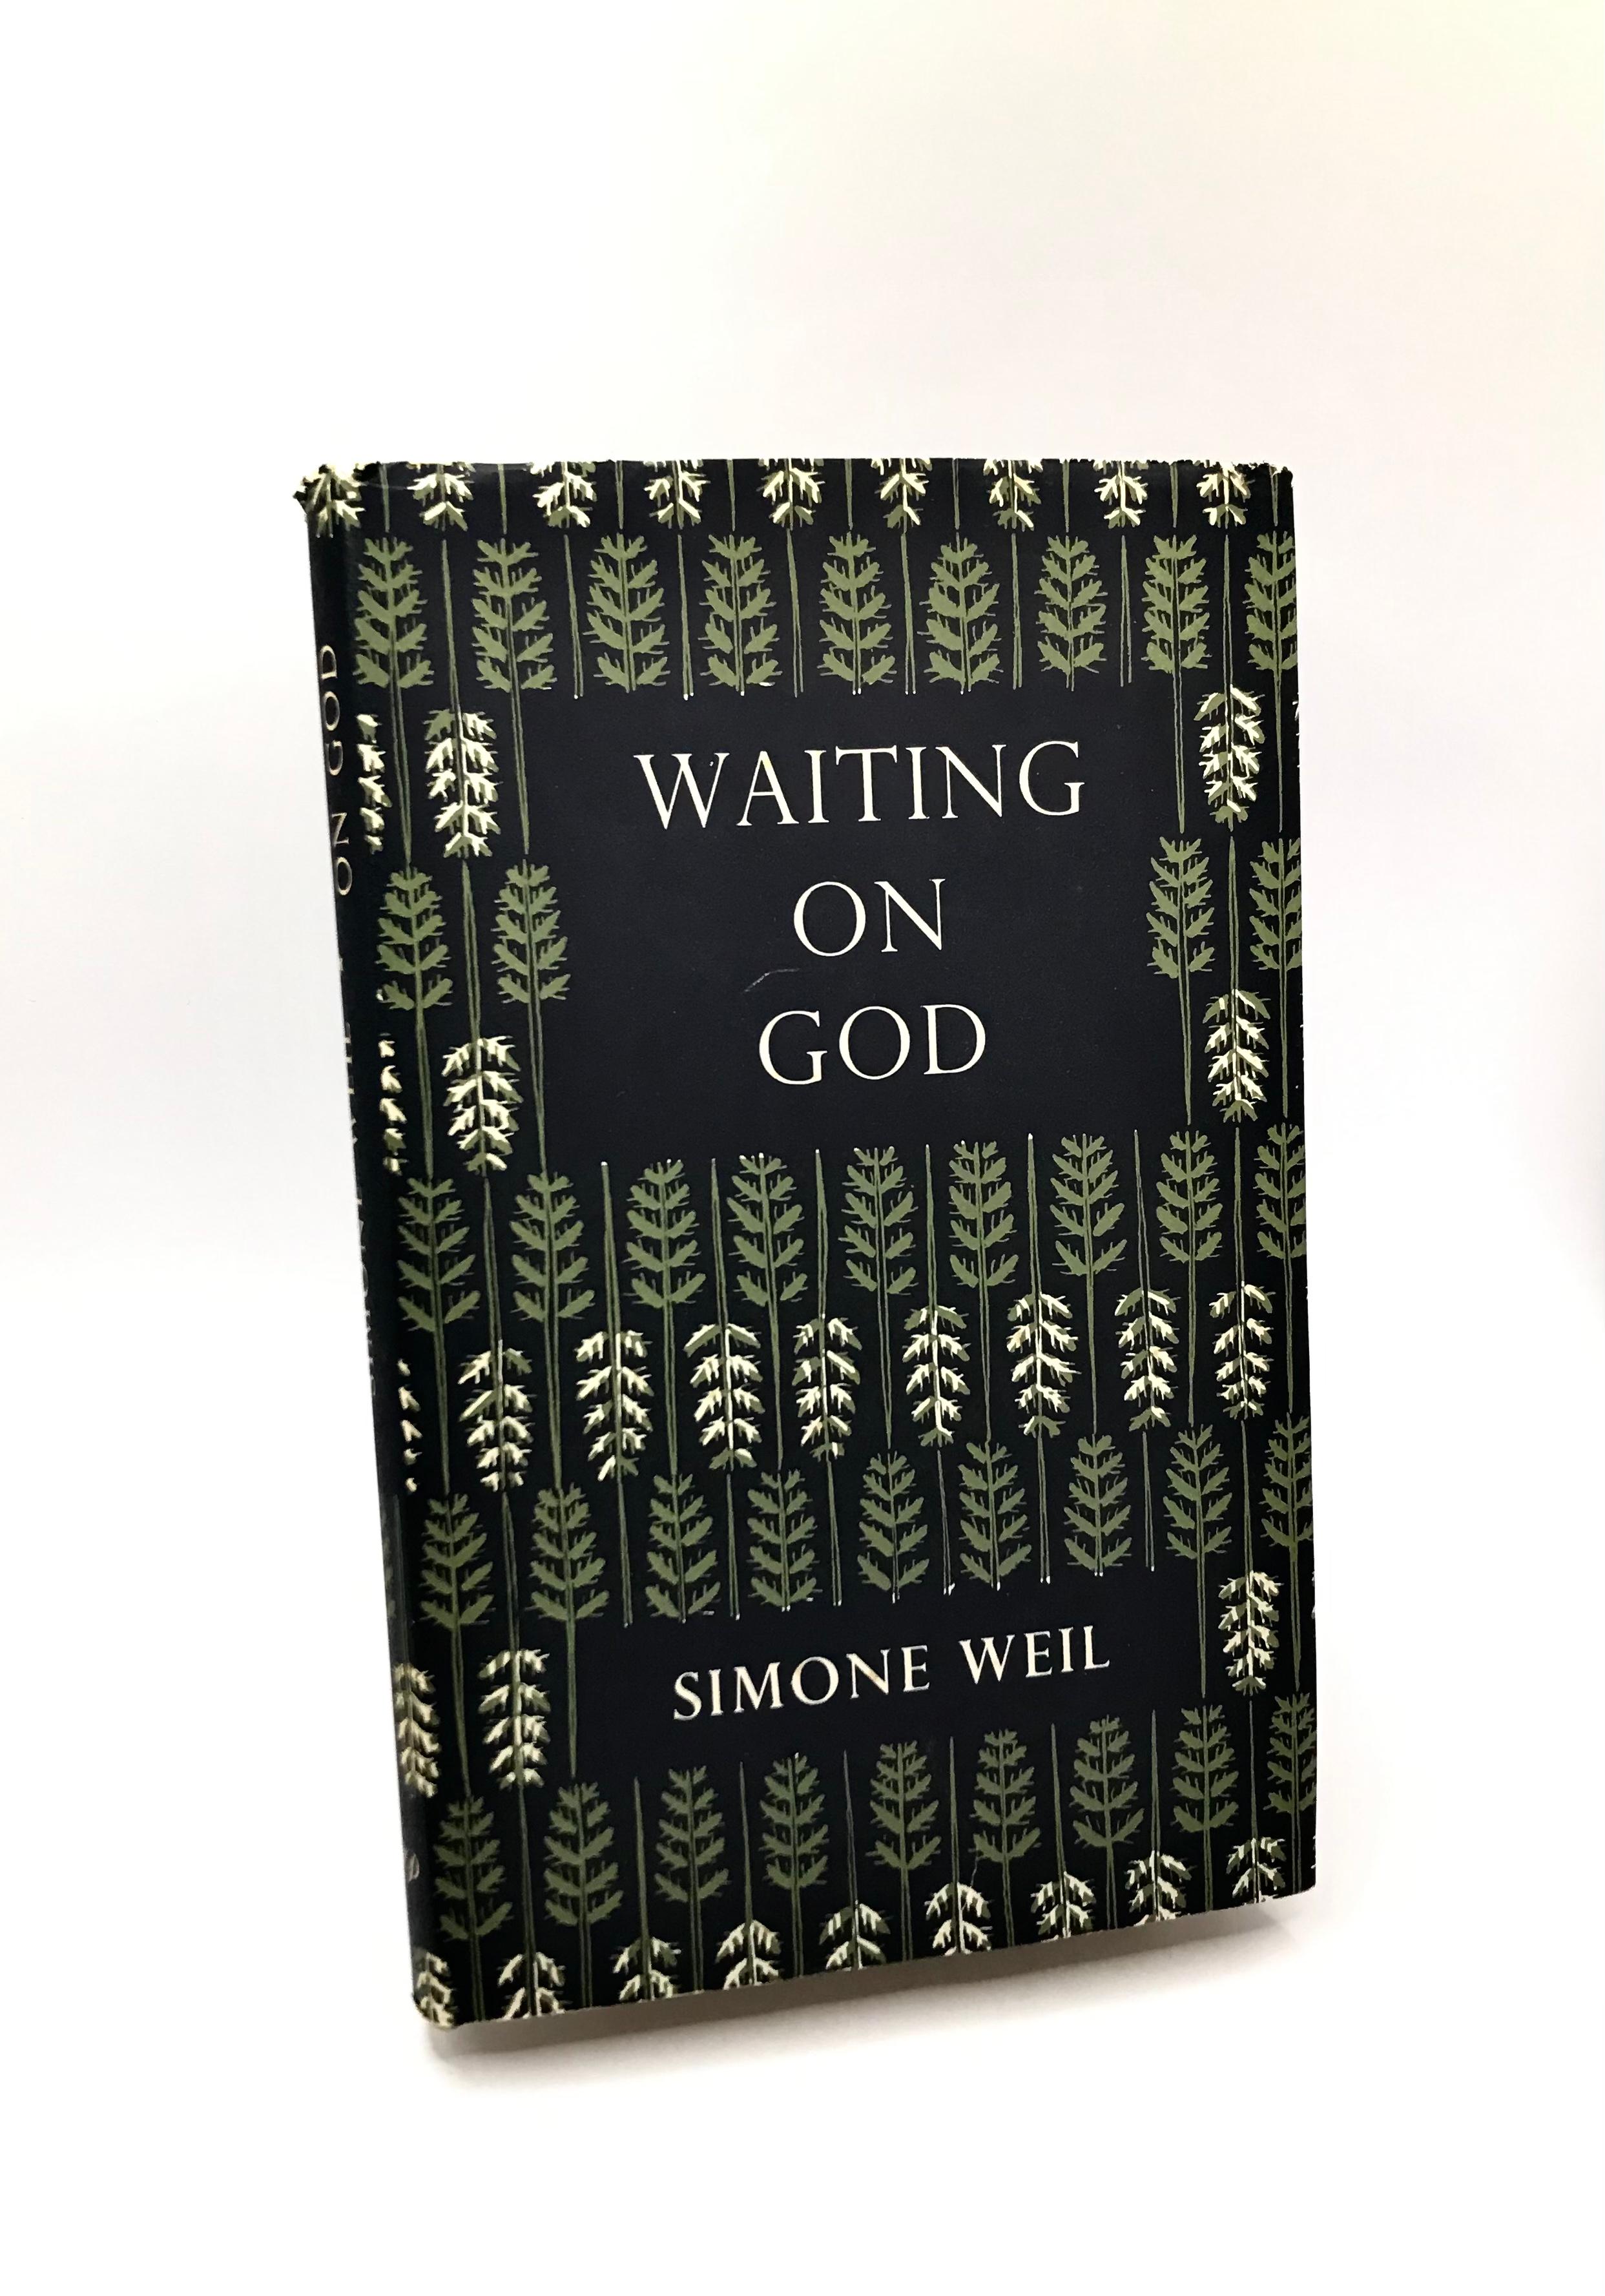 Waiting On God by Simone Weil